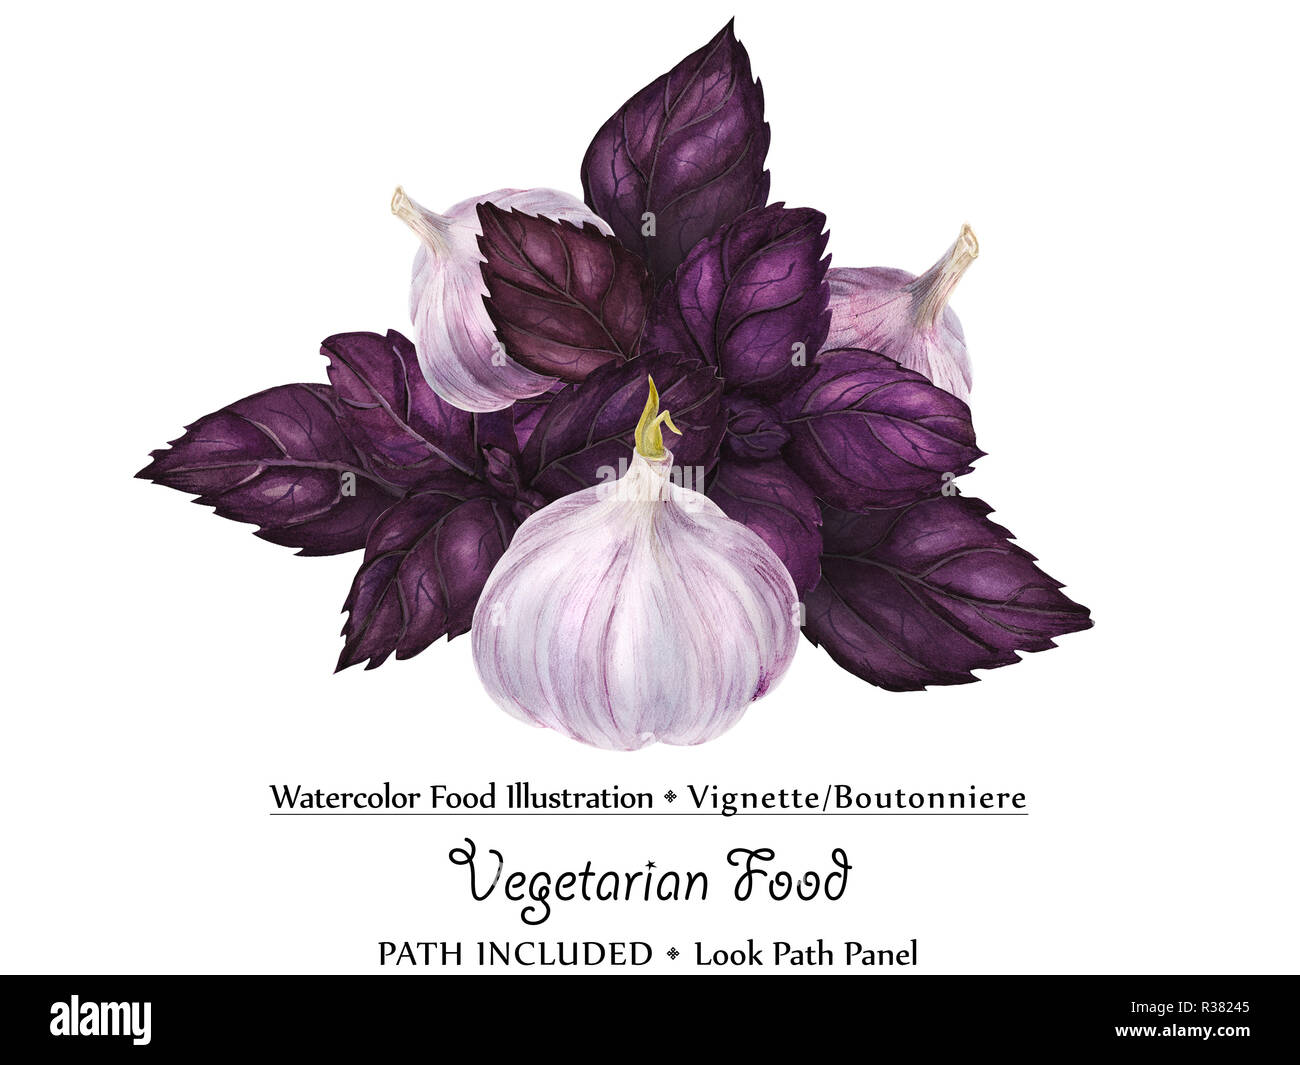 Watercolor vegan vignette biutonniere by freshness purple basil and garlic. Isolated, clipping path included, vegan design Stock Photo